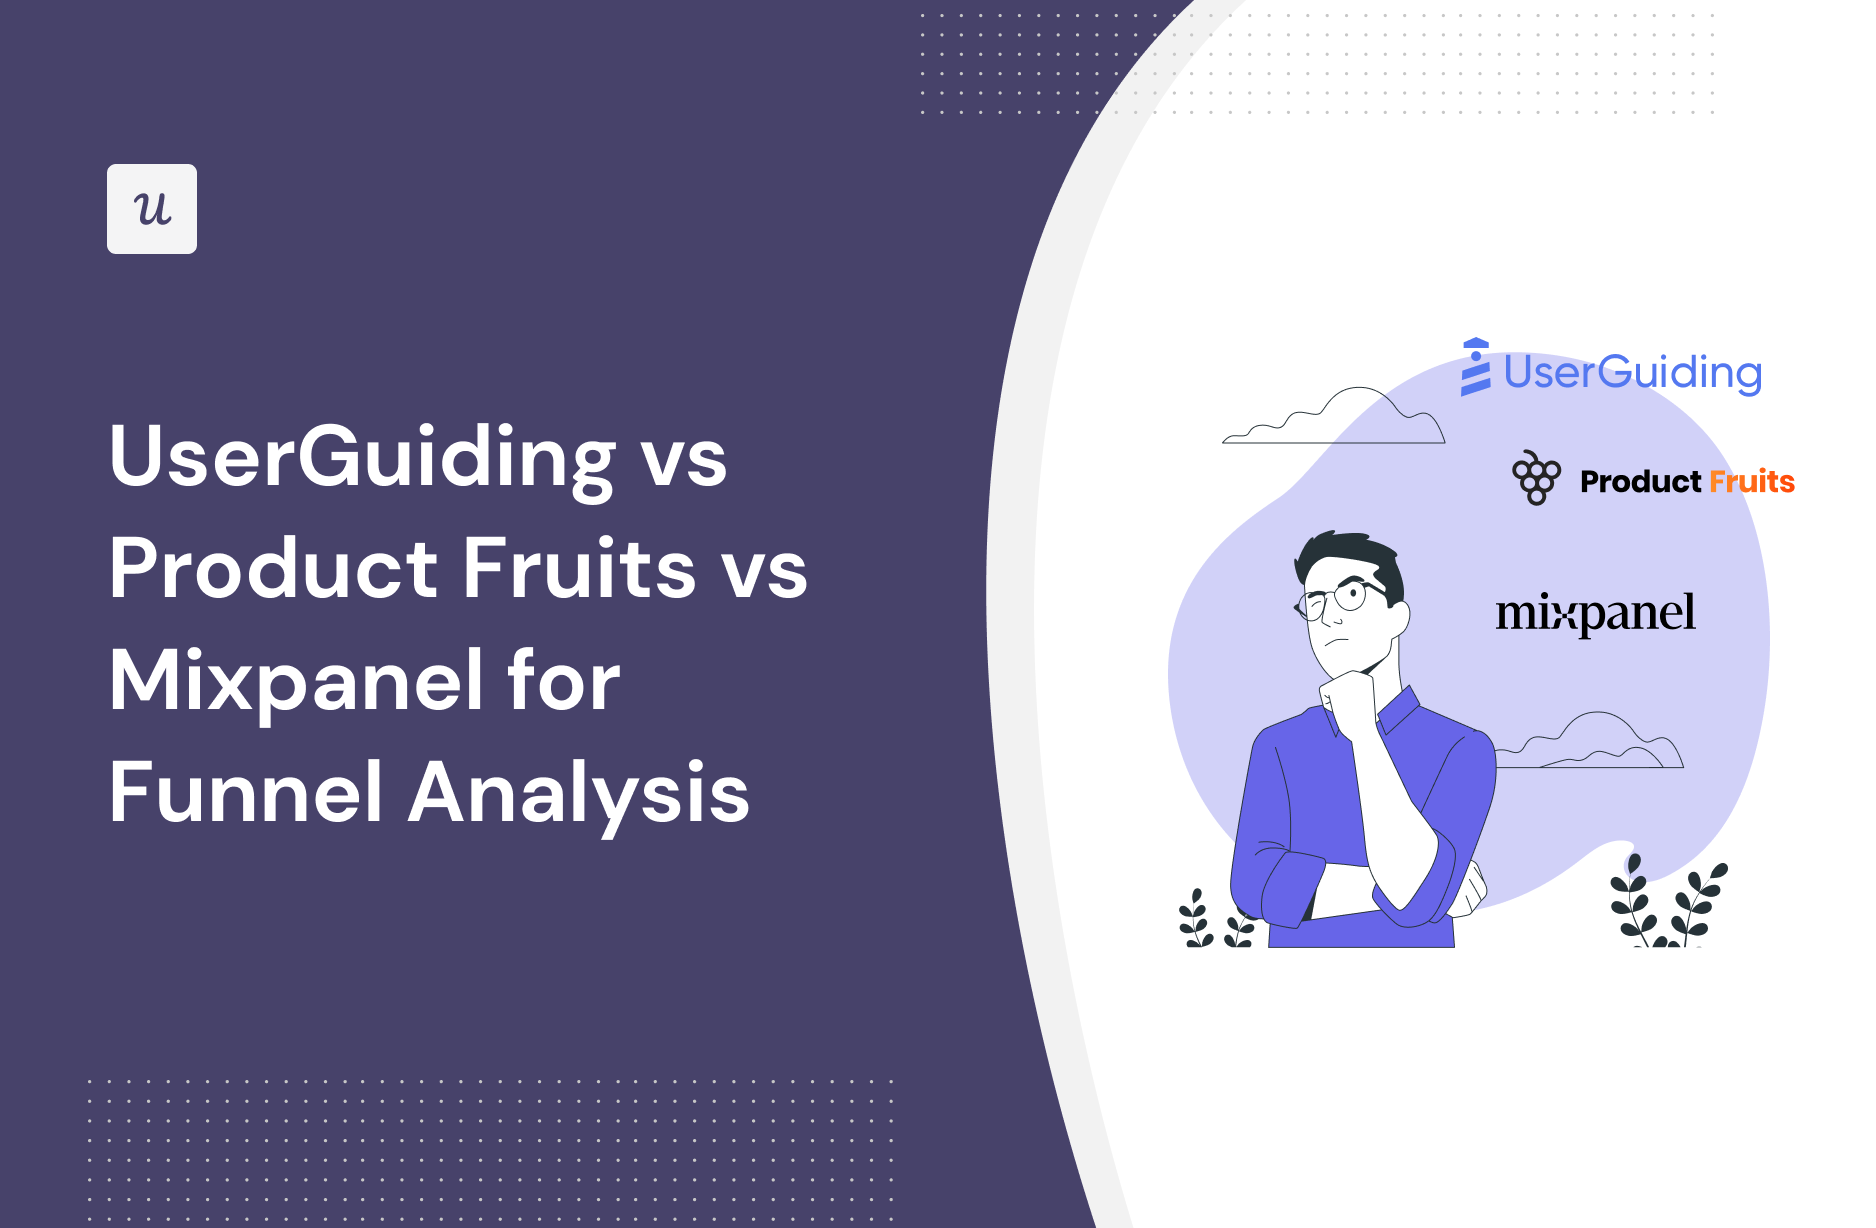 UserGuiding vs Product Fruits vs Mixpanel for Funnel Analysis